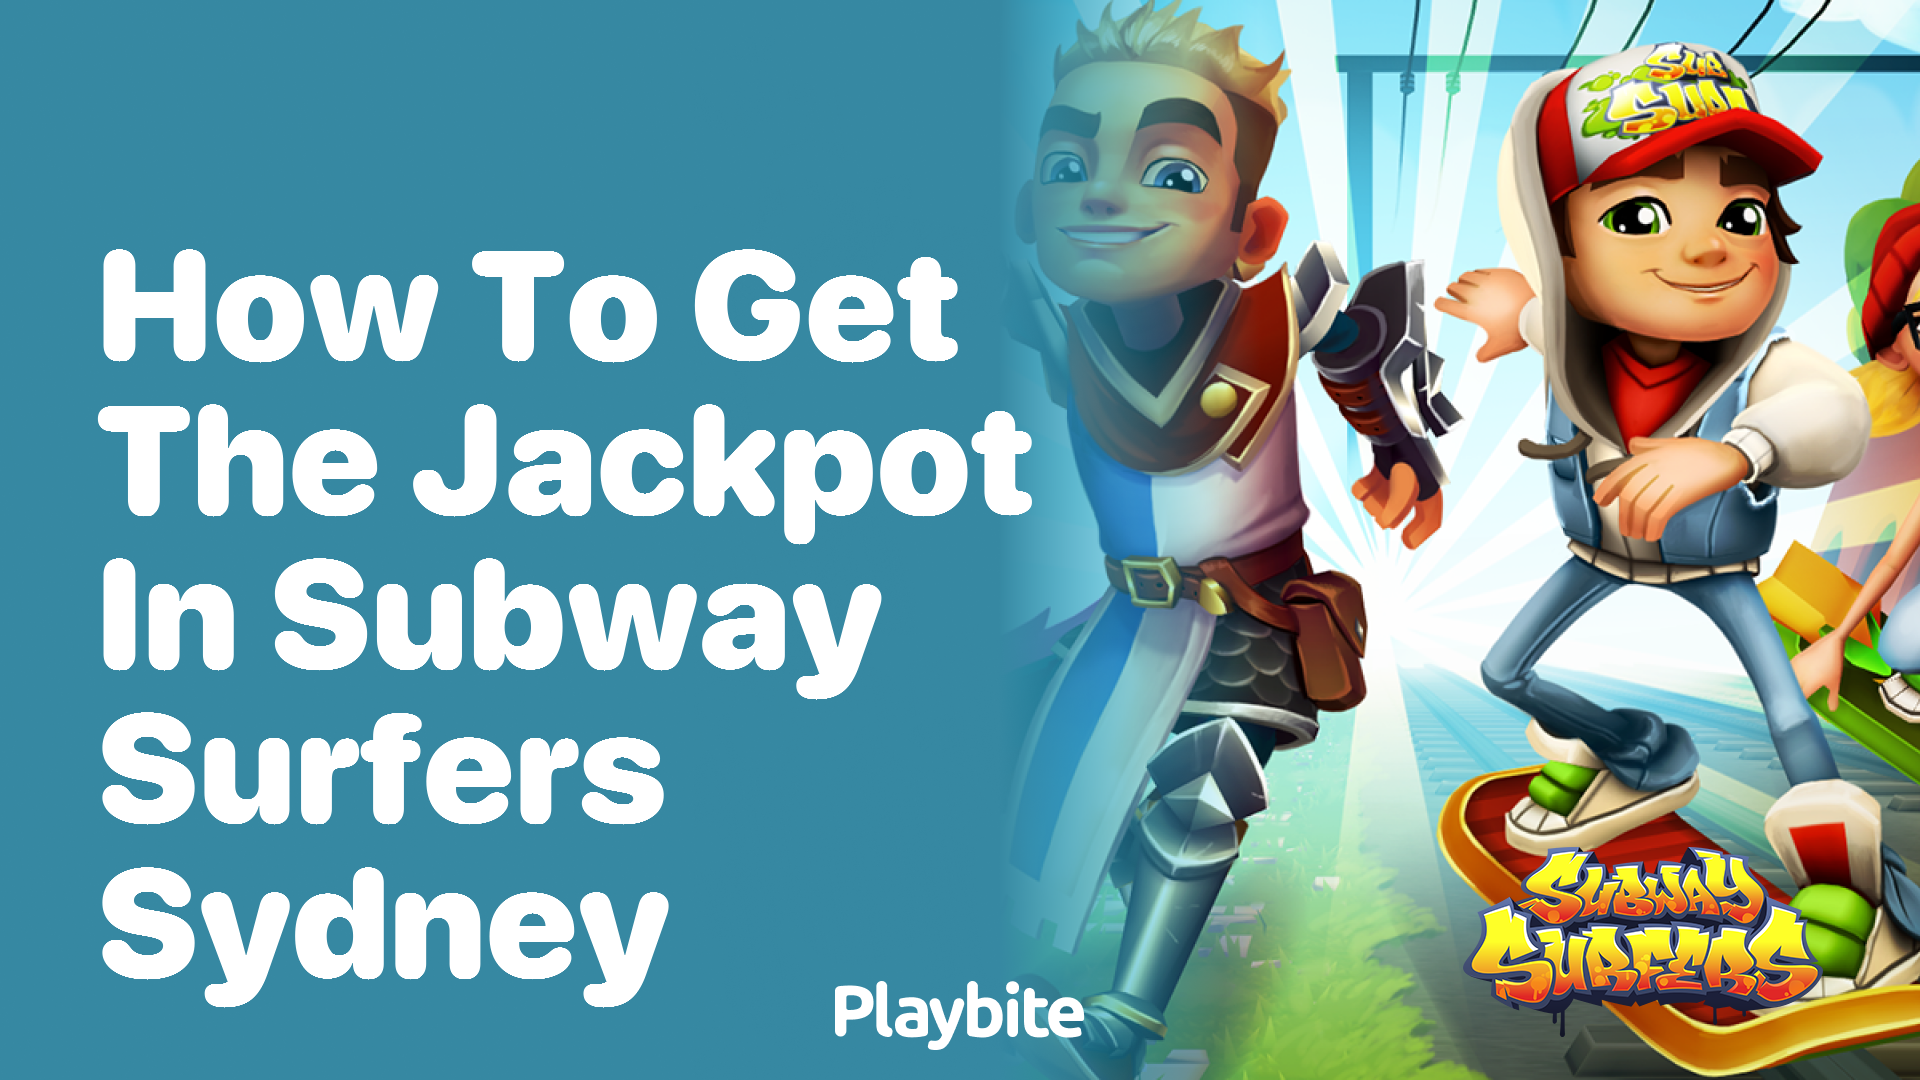 How to Get the Jackpot in Subway Surfers Sydney